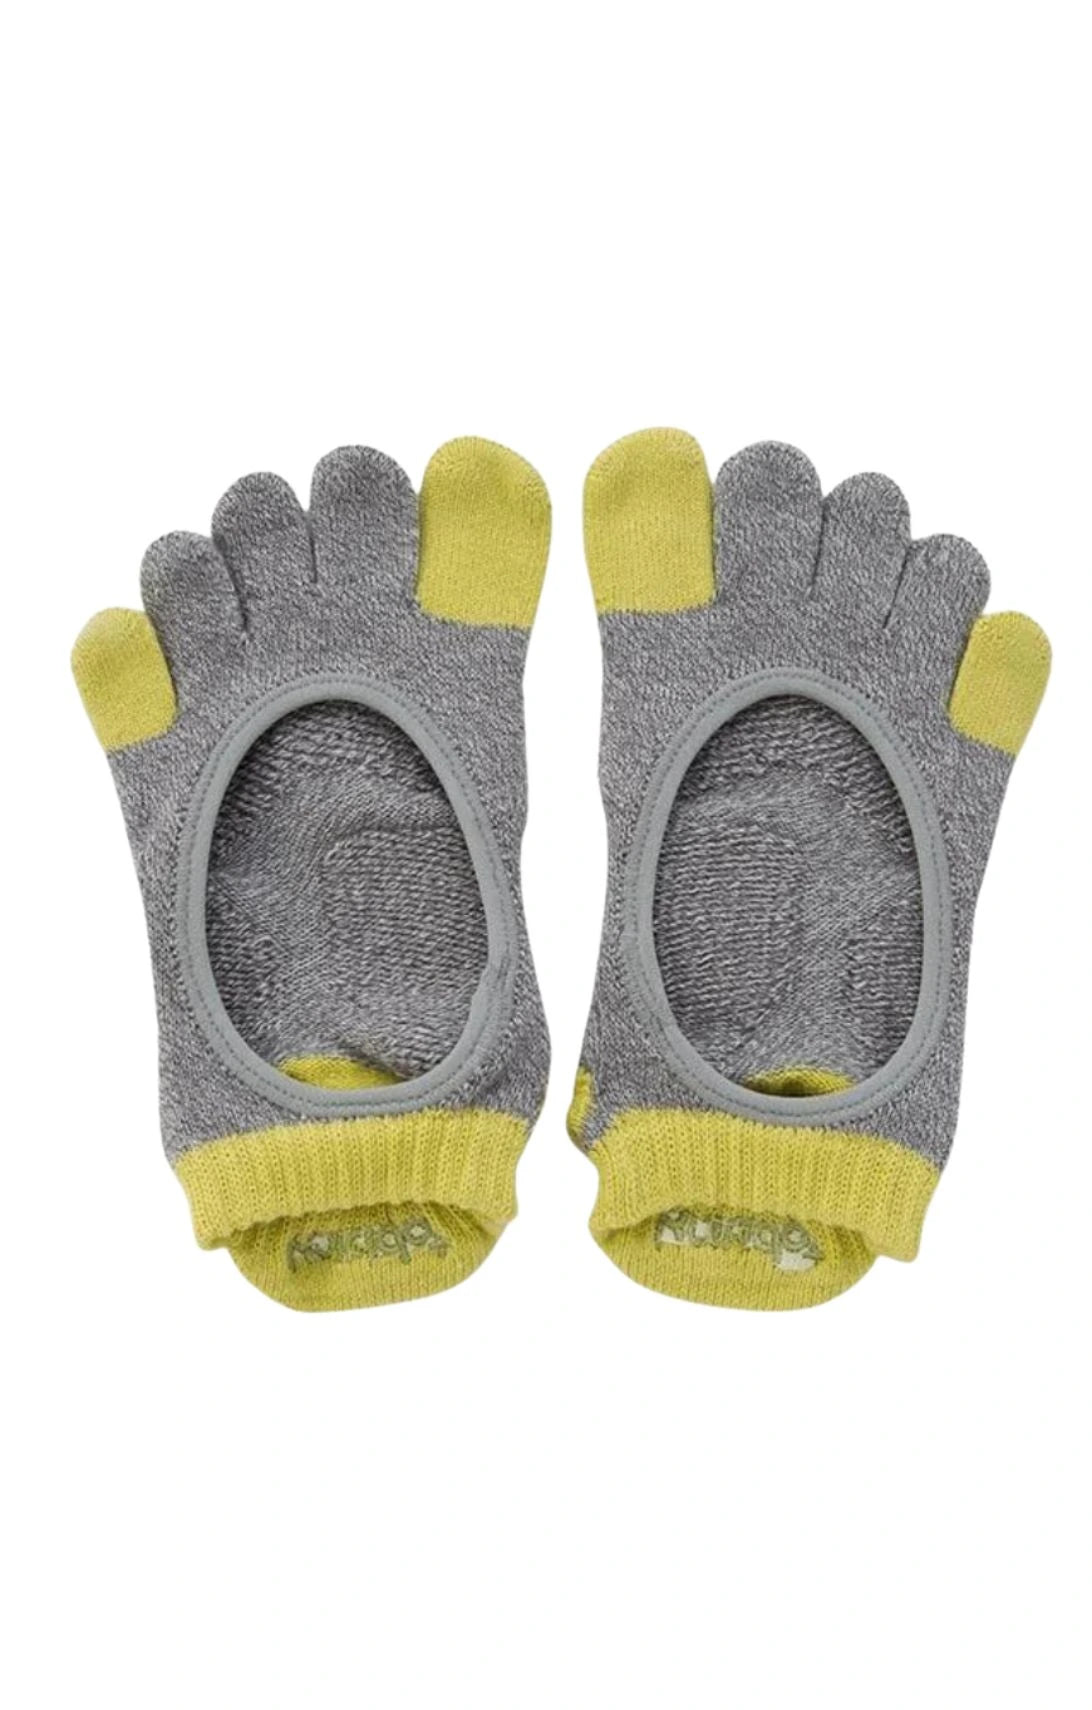 Brand name Knitido plus product name TWO COLORS FOOTIE GRIP TOE SOCKS WITH *POWER PADS* color Grey